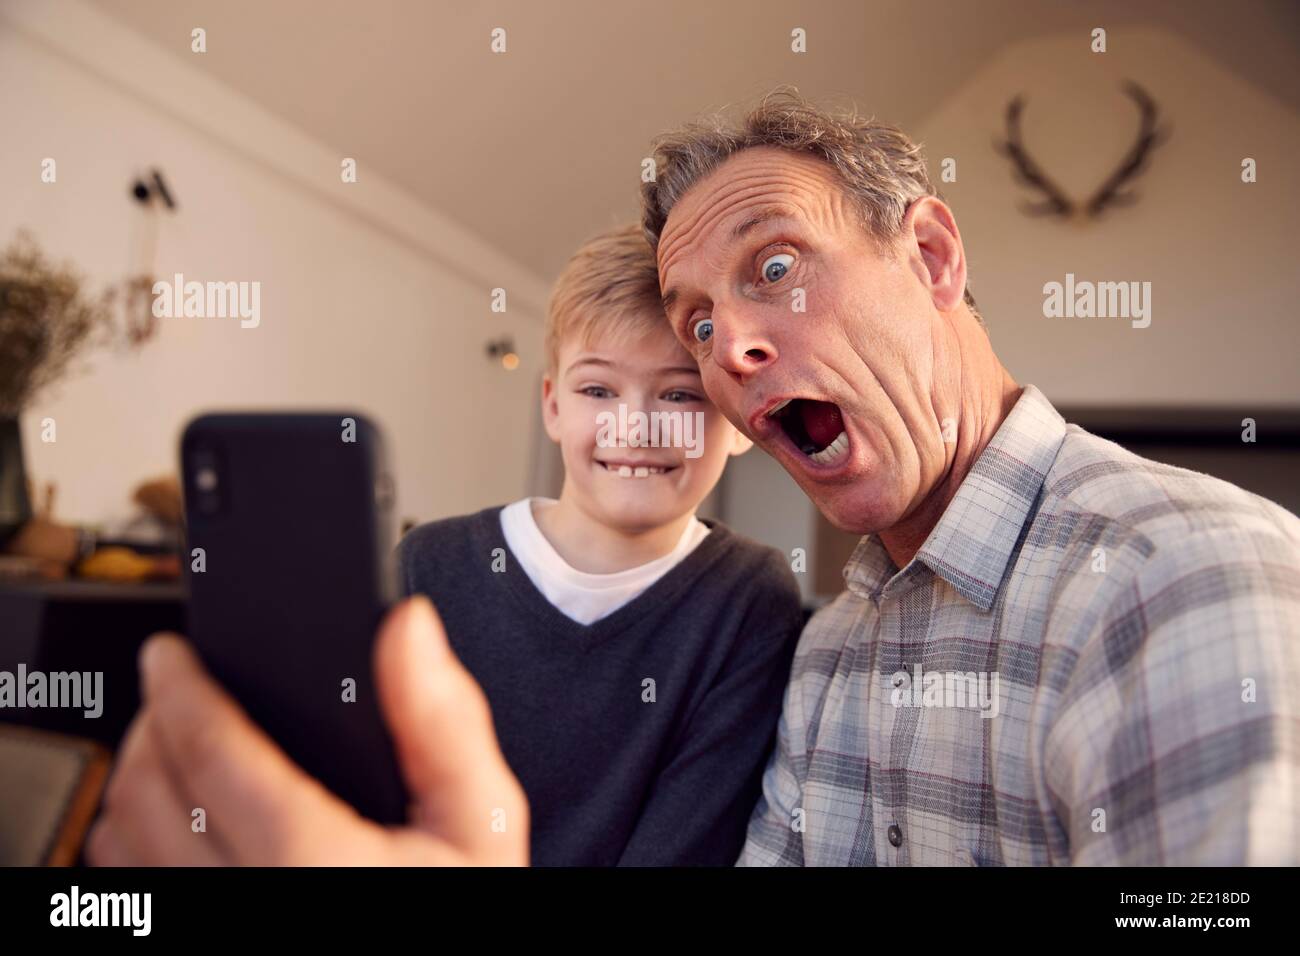 Grandson With Grandfather Pulling Faces And Taking Selfie On Mobile Phone At Home Stock Photo